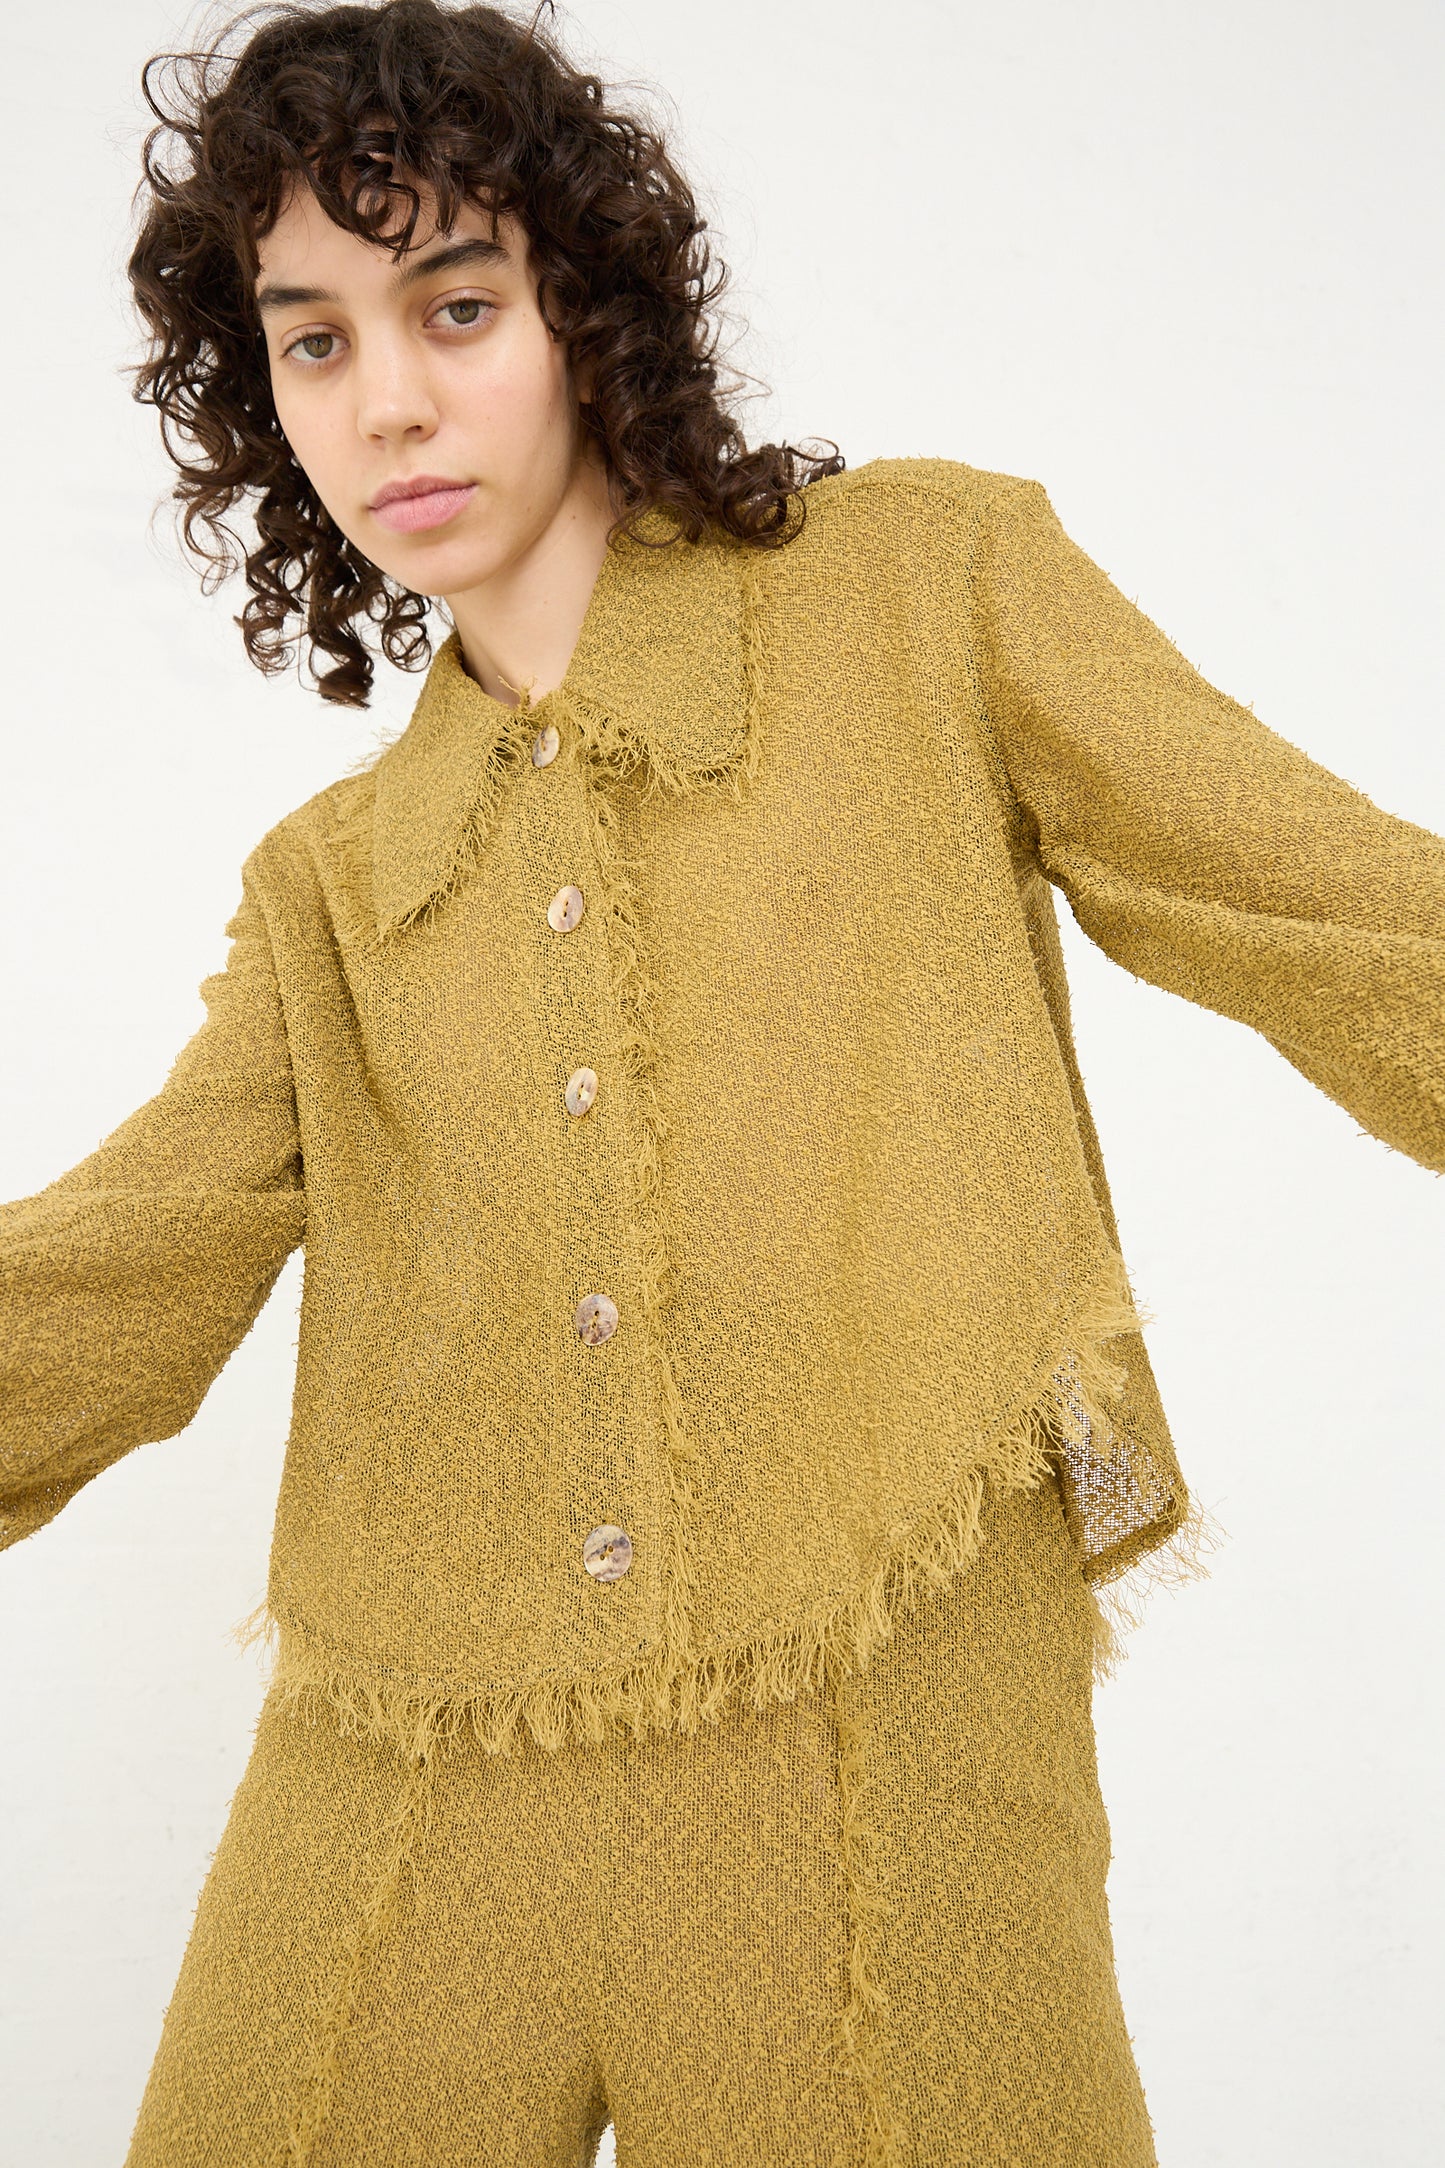 The model is wearing a Tweed Blouse in Cumin from Veronique Leroy.